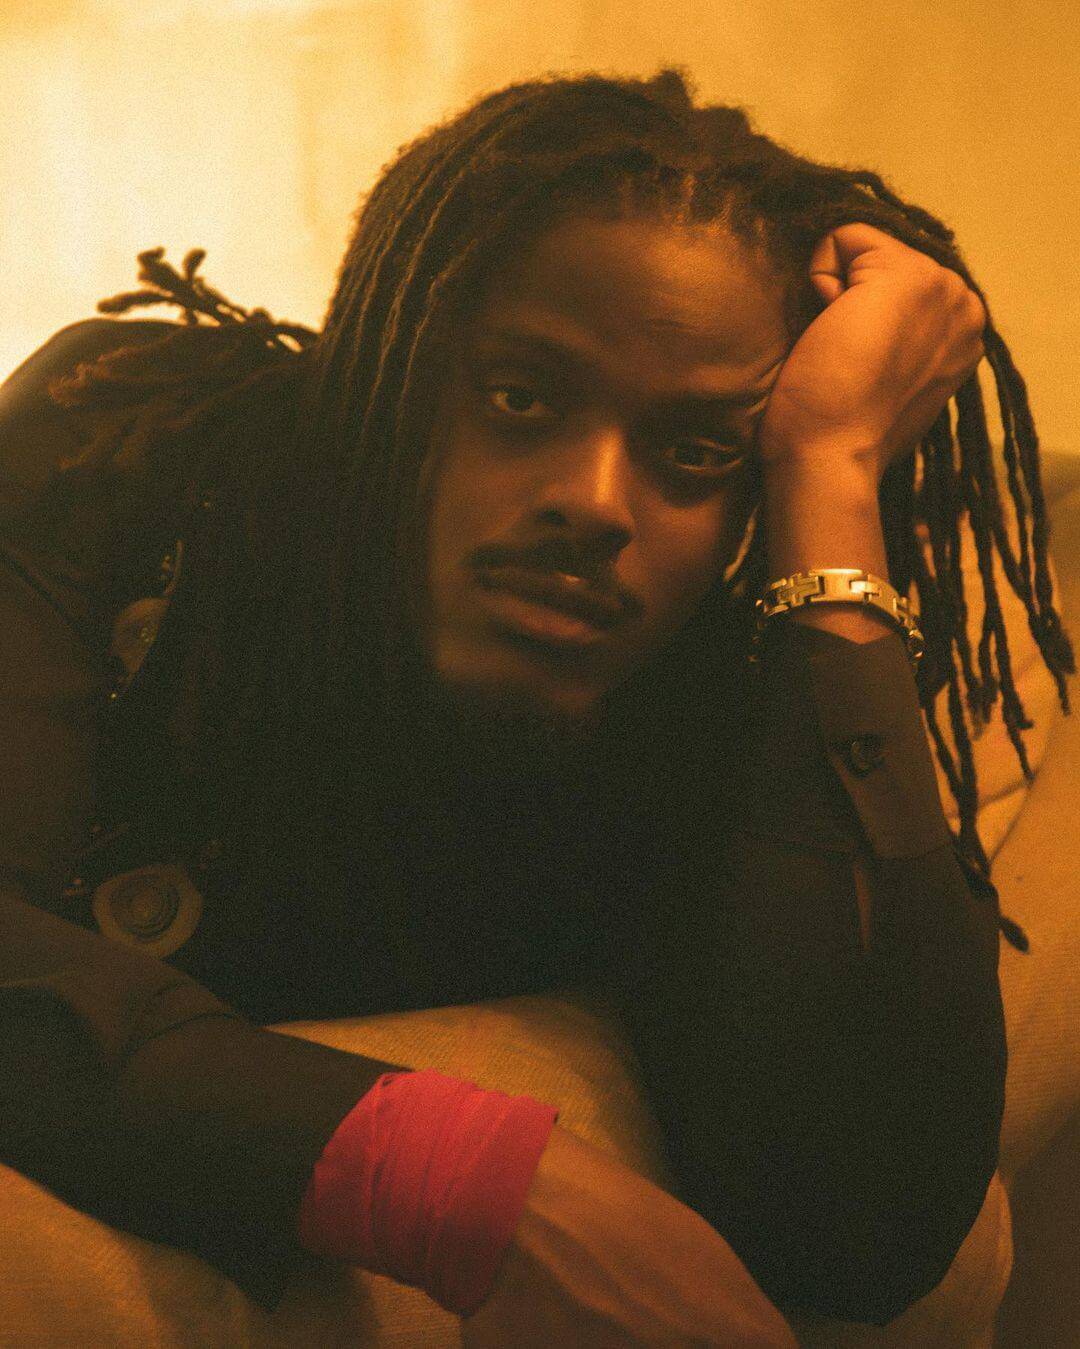 Best New Music: Tomi Thomas enlists Buju Banton for sultry new track “Hurricane”